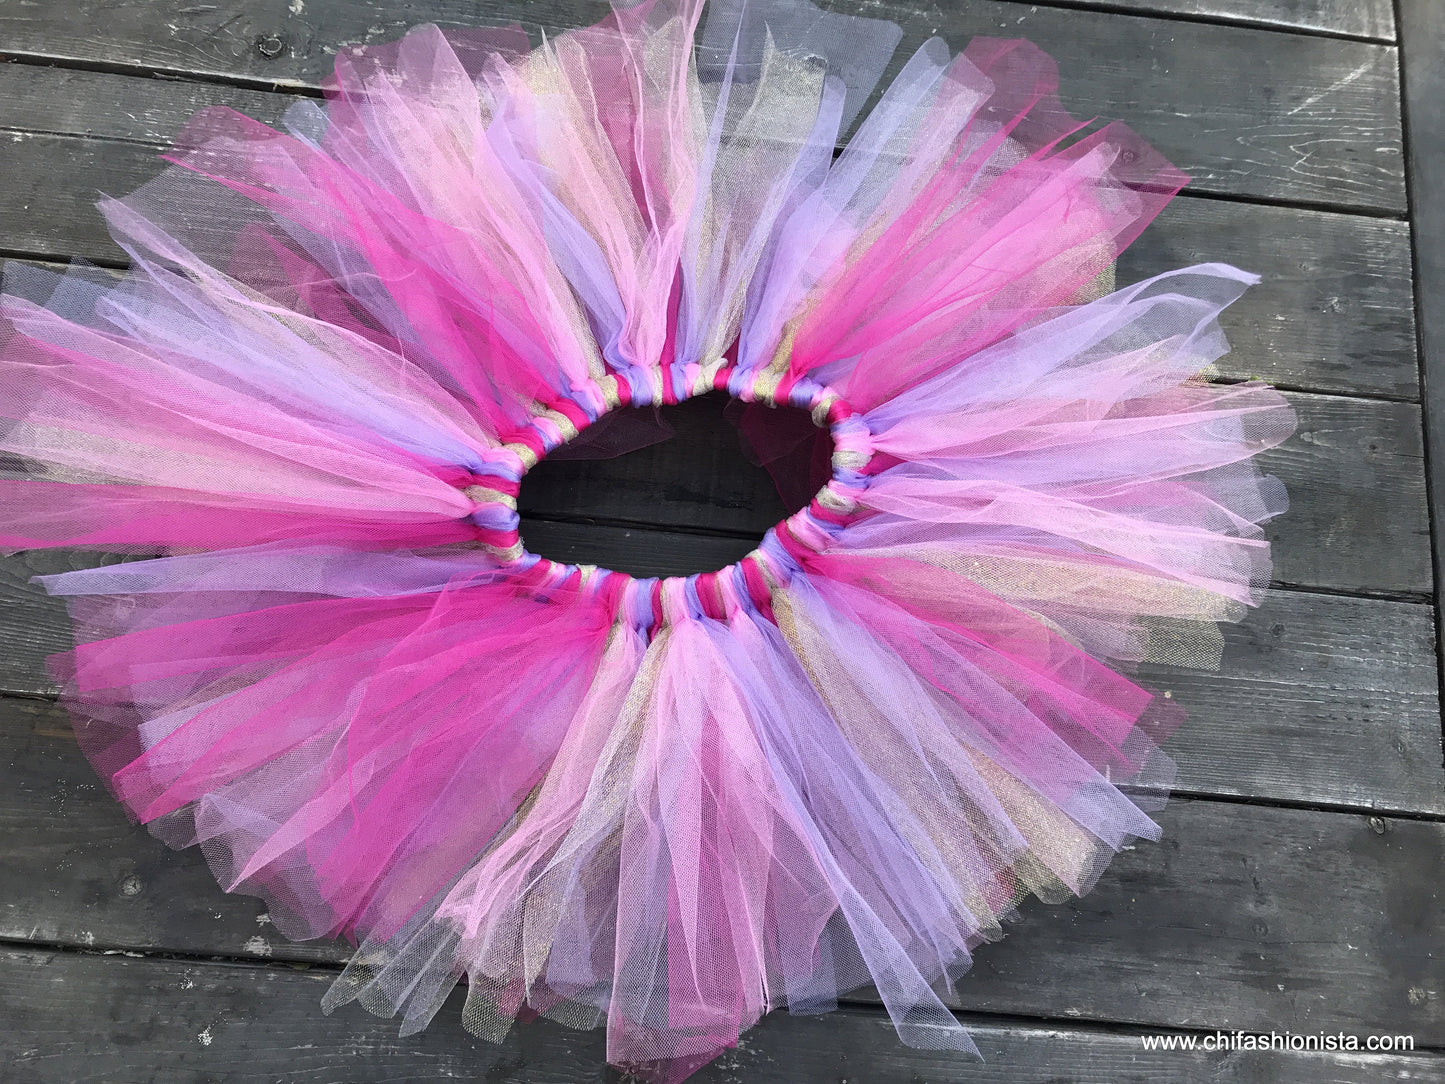 Custom Tutu: Perfect for birthdays, Holidays, costumes and more